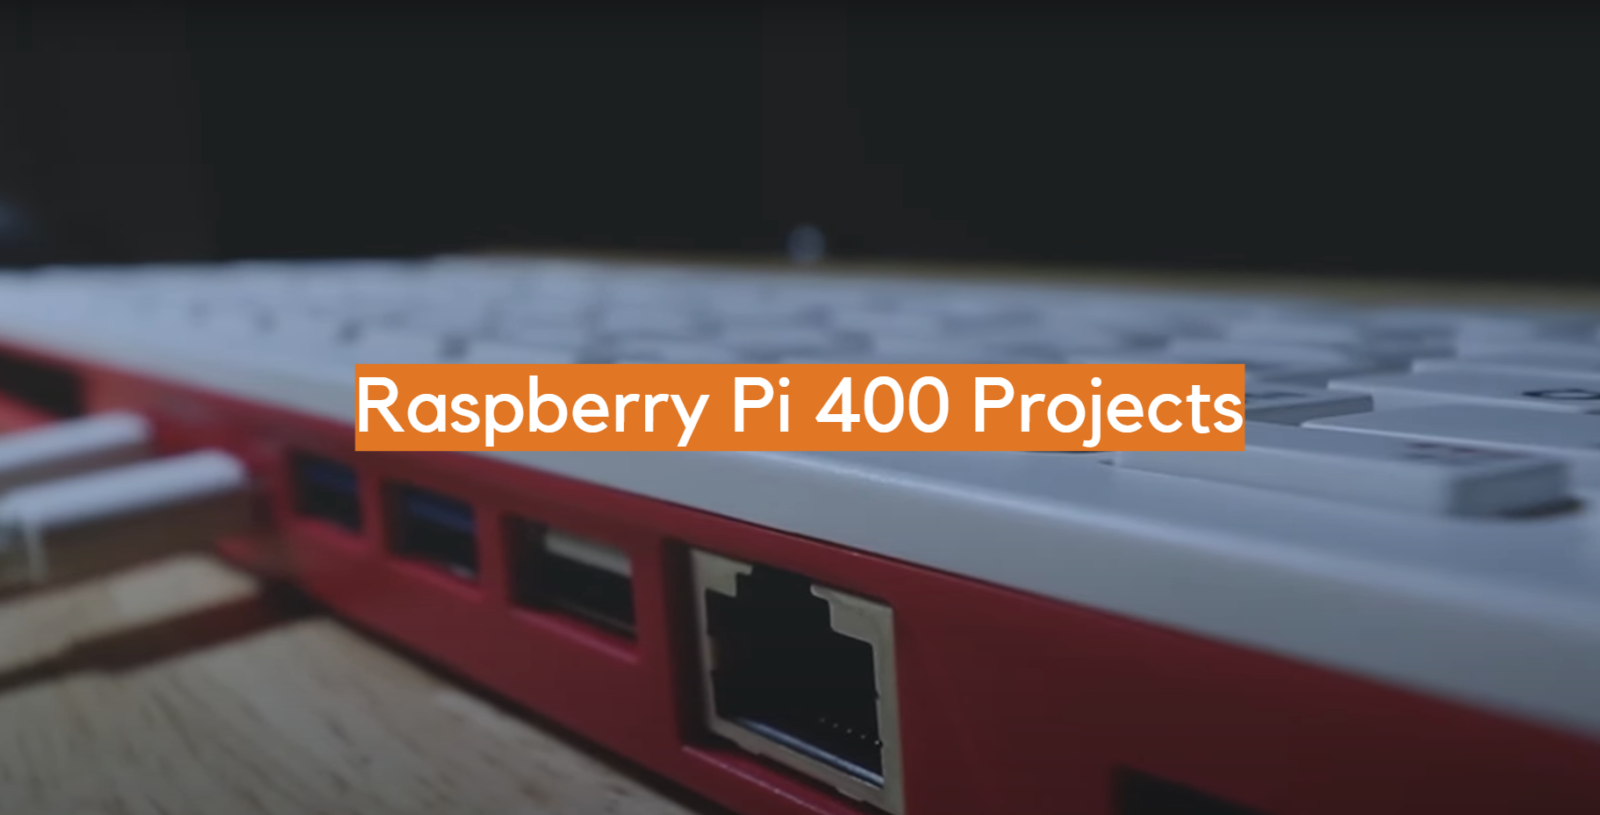 Raspberry Pi 400 Projects